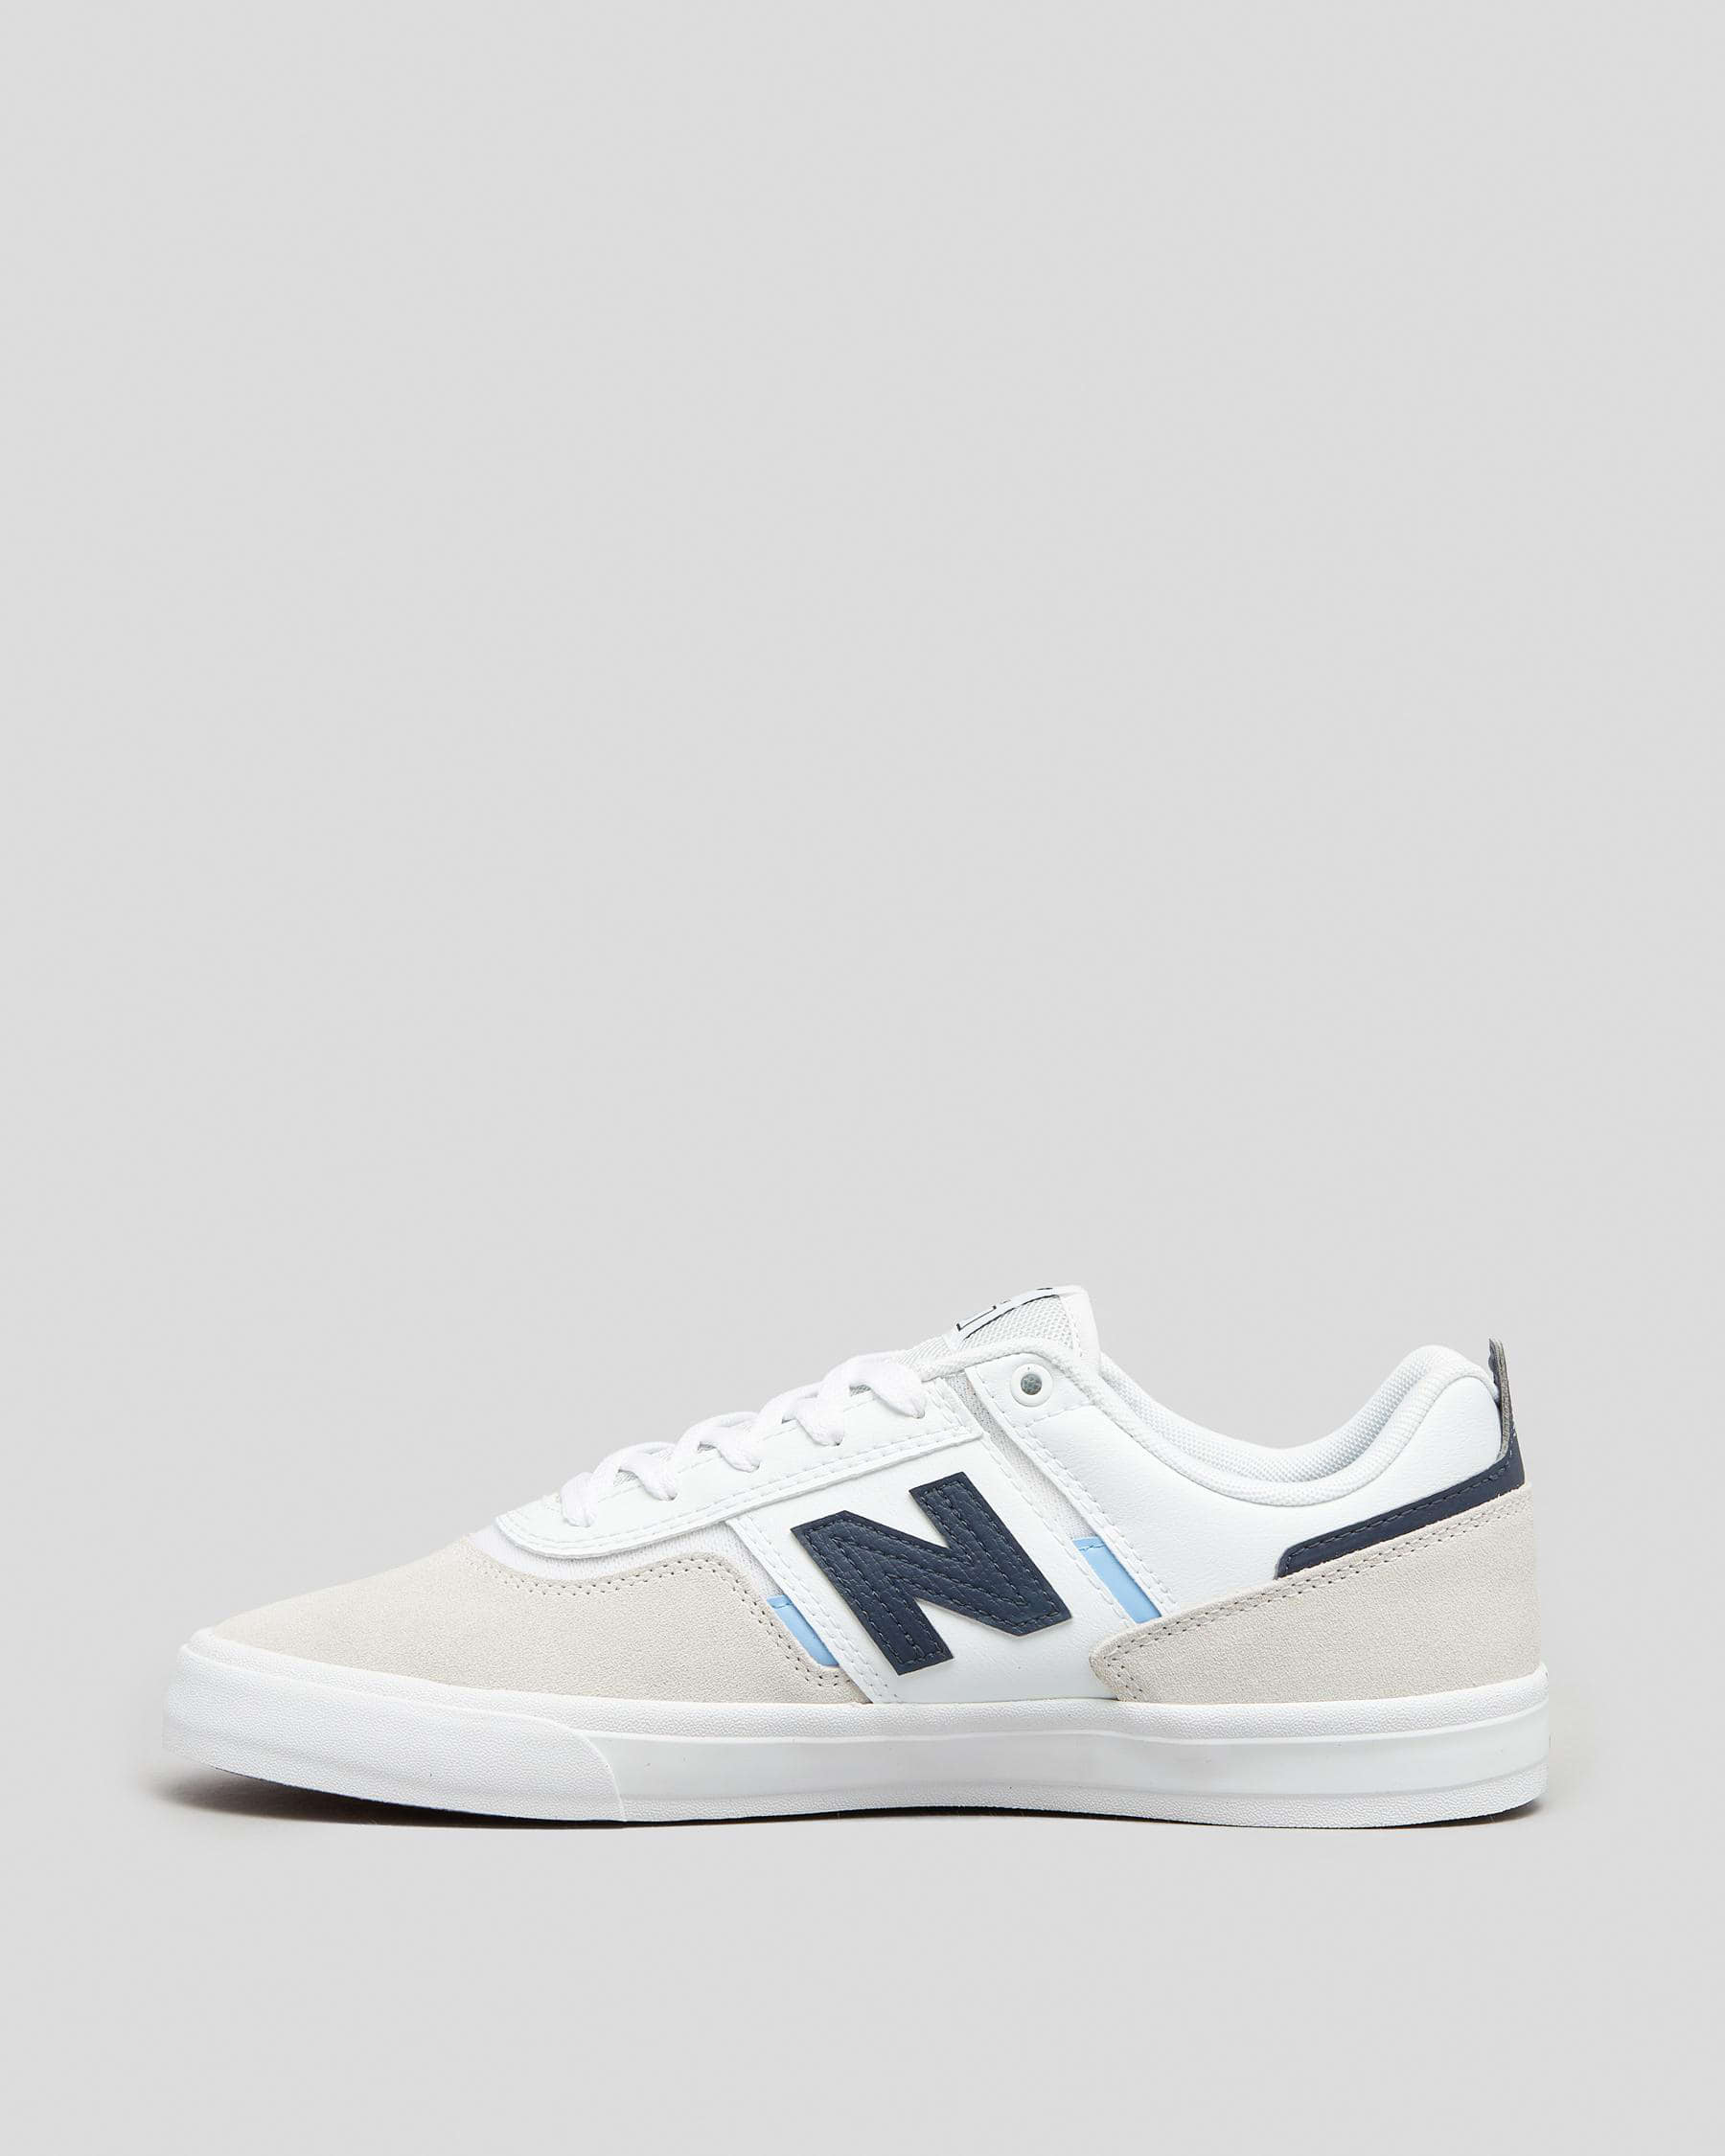 New Balance Nb 306 Shoes In White/navy - Fast Shipping & Easy Returns ...